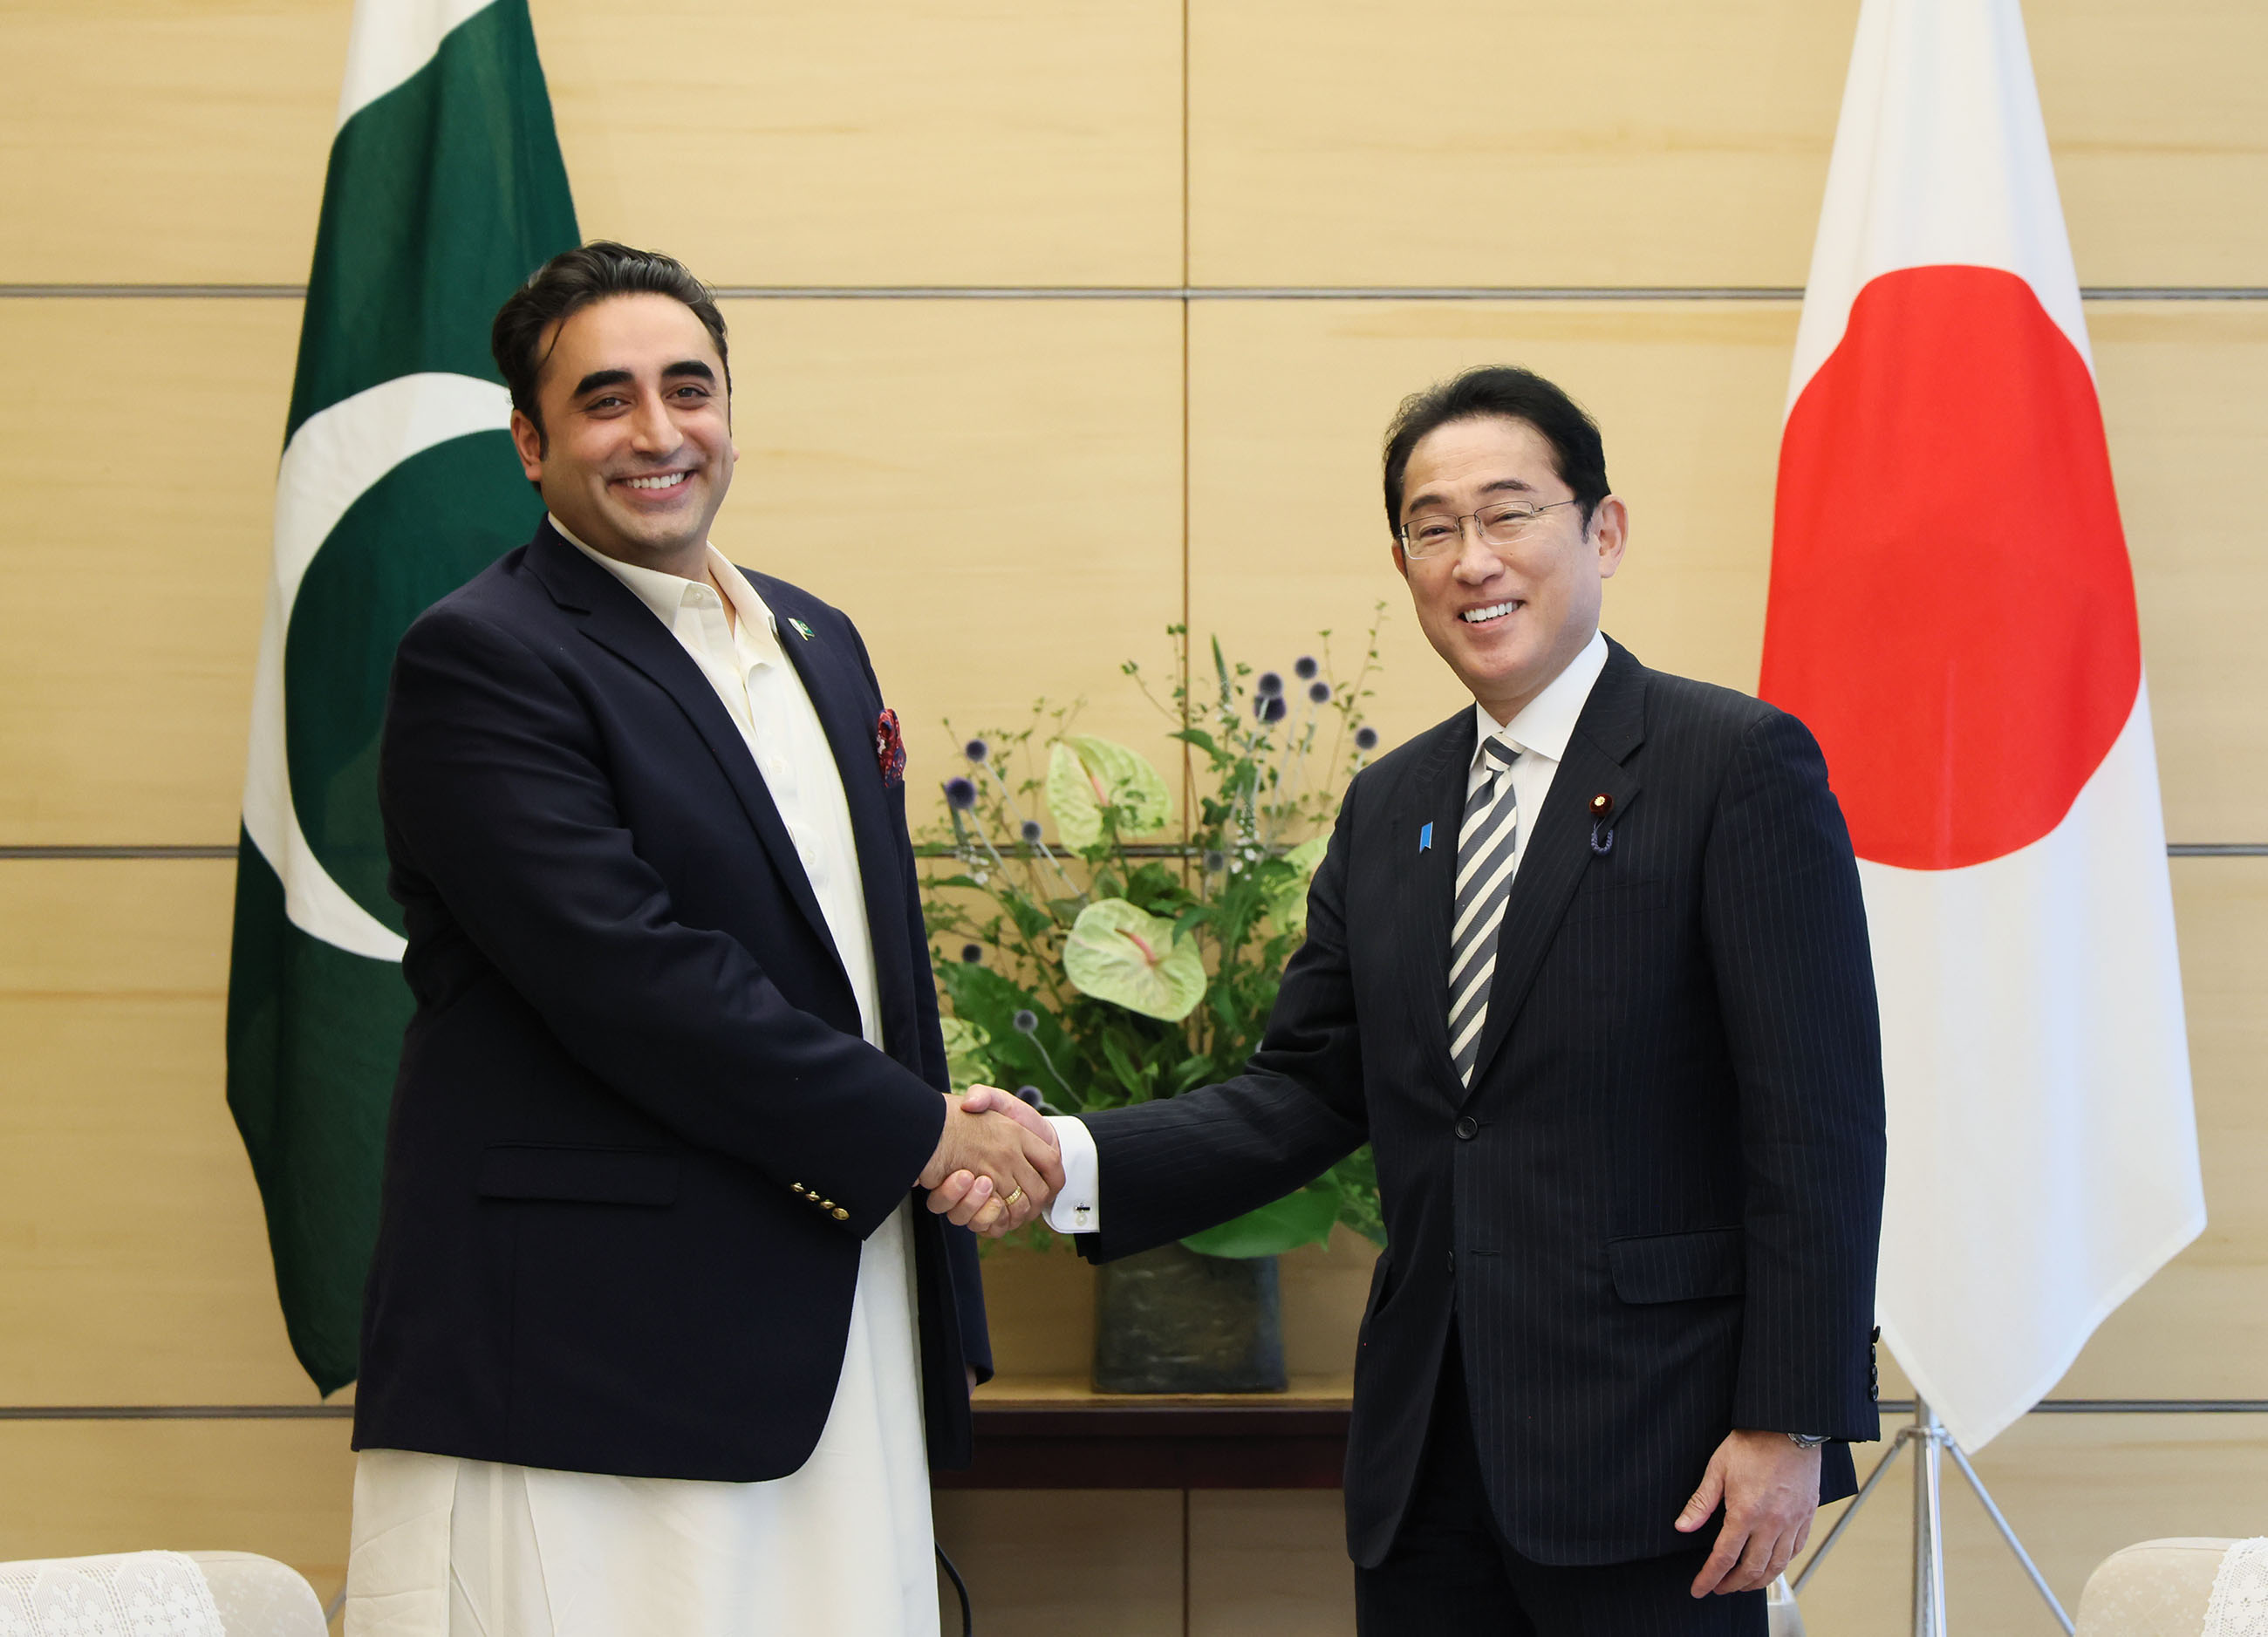 Courtesy Call from Foreign Minister Bilawal Bhutto Zardari of Pakistan